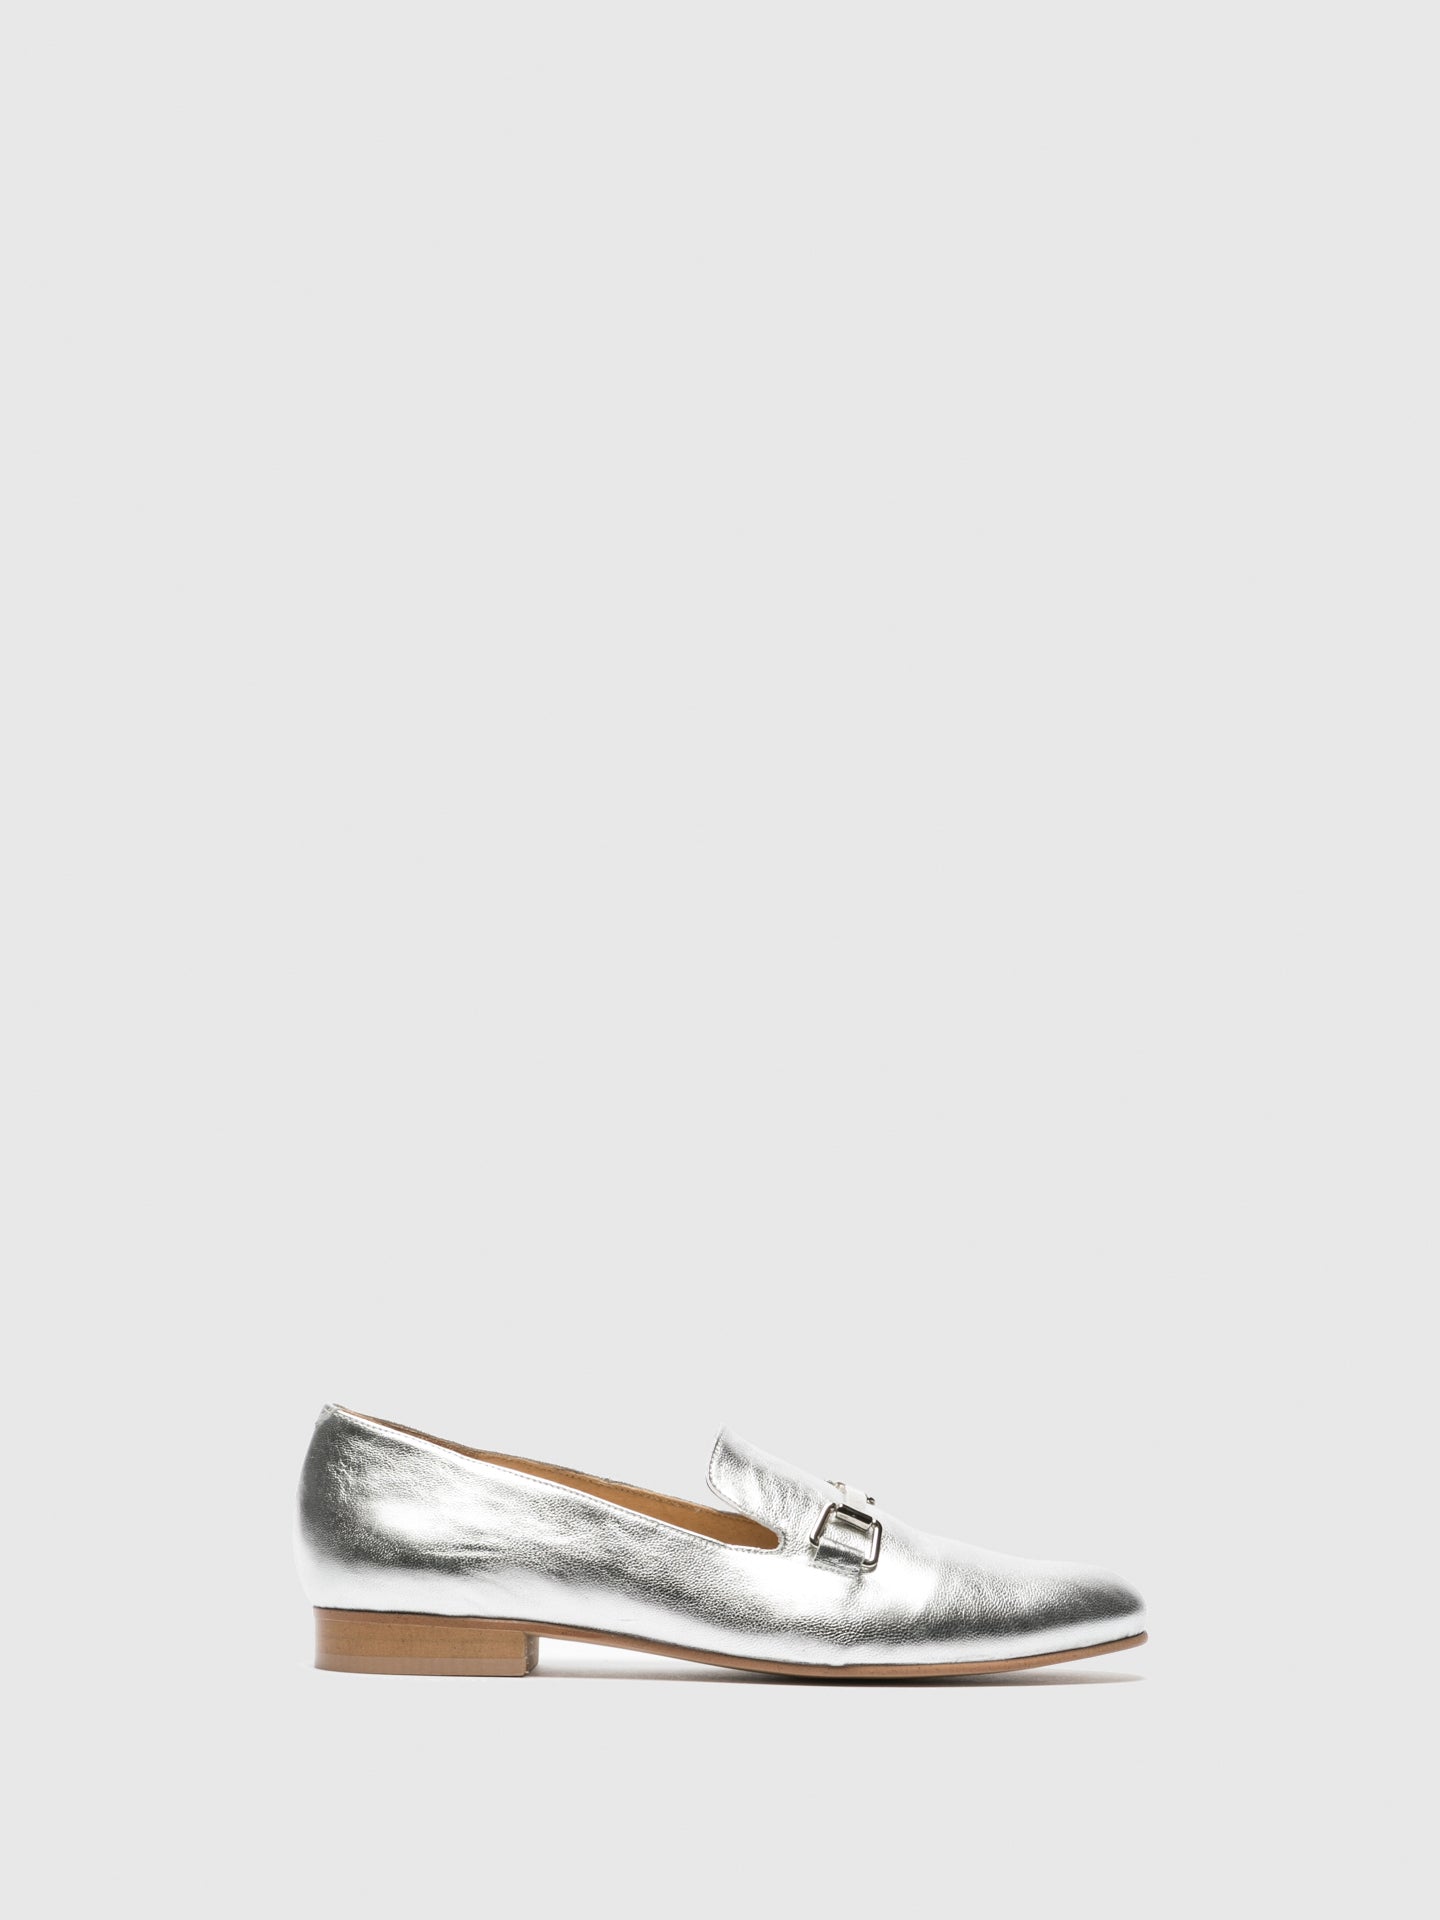 Foreva Silver Loafers Shoes